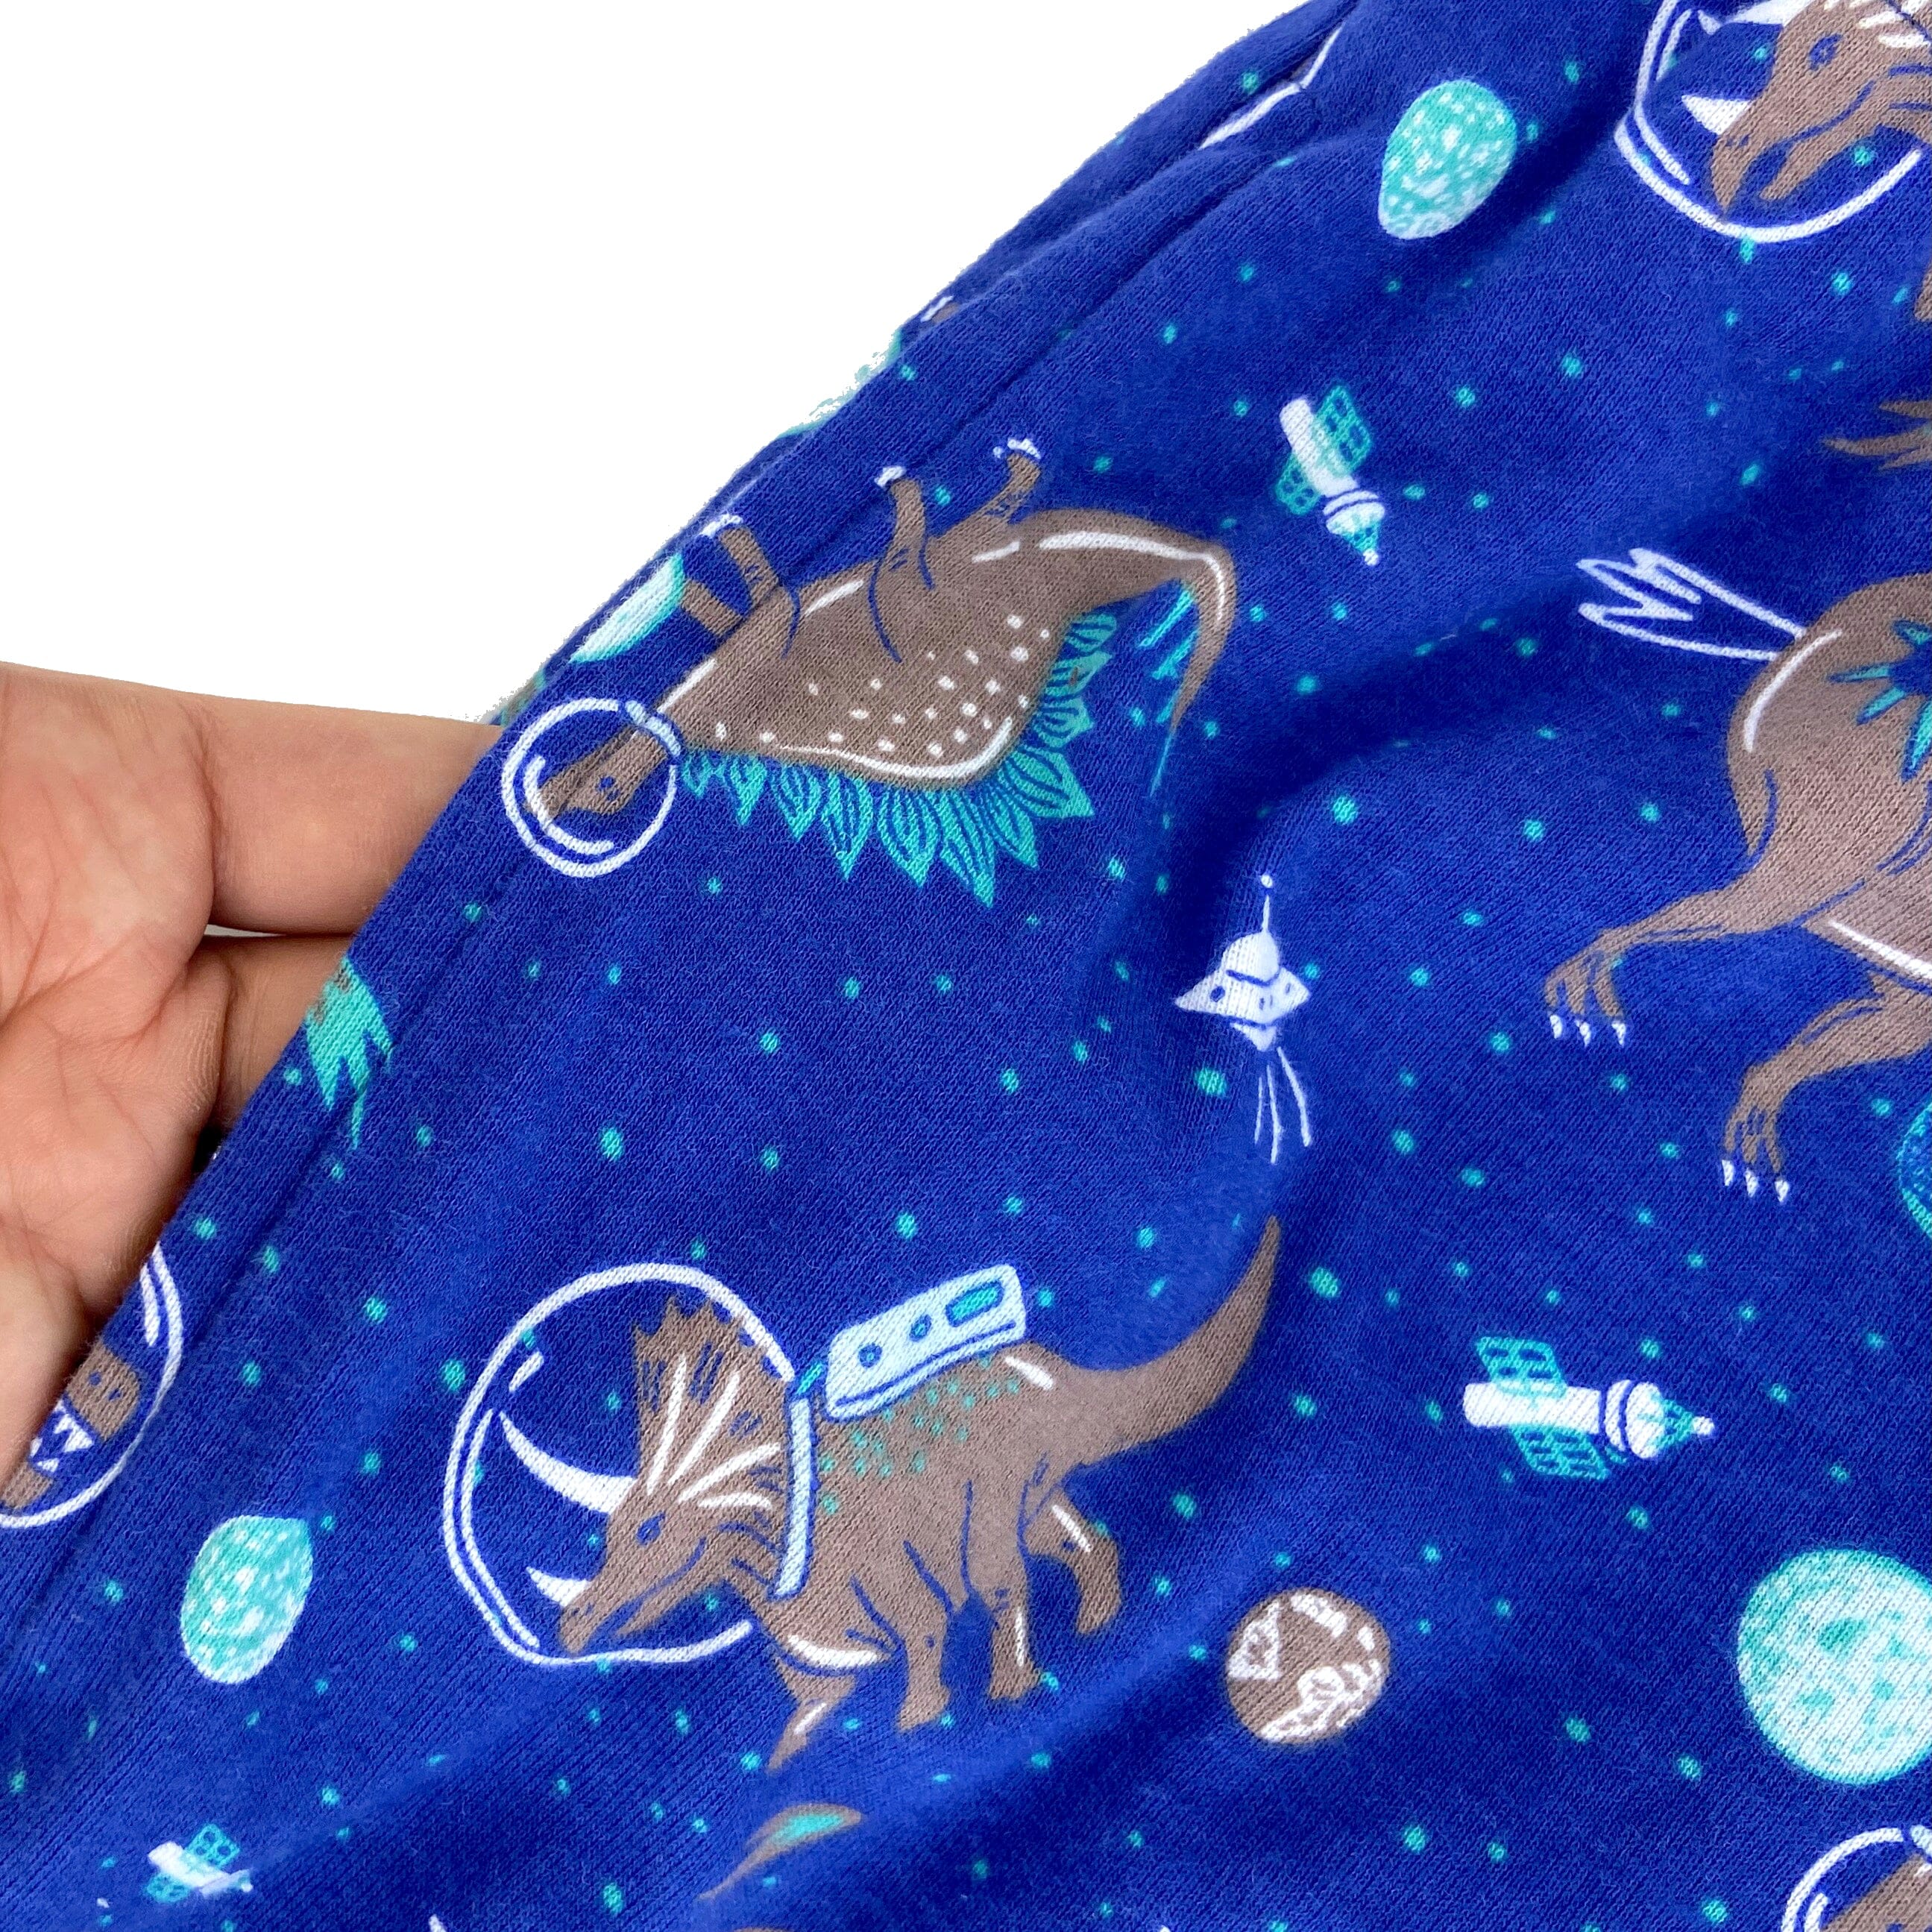 Men's Dinosaurs in Outer Space Pattern Cotton Knit Pajama Pant Bottoms